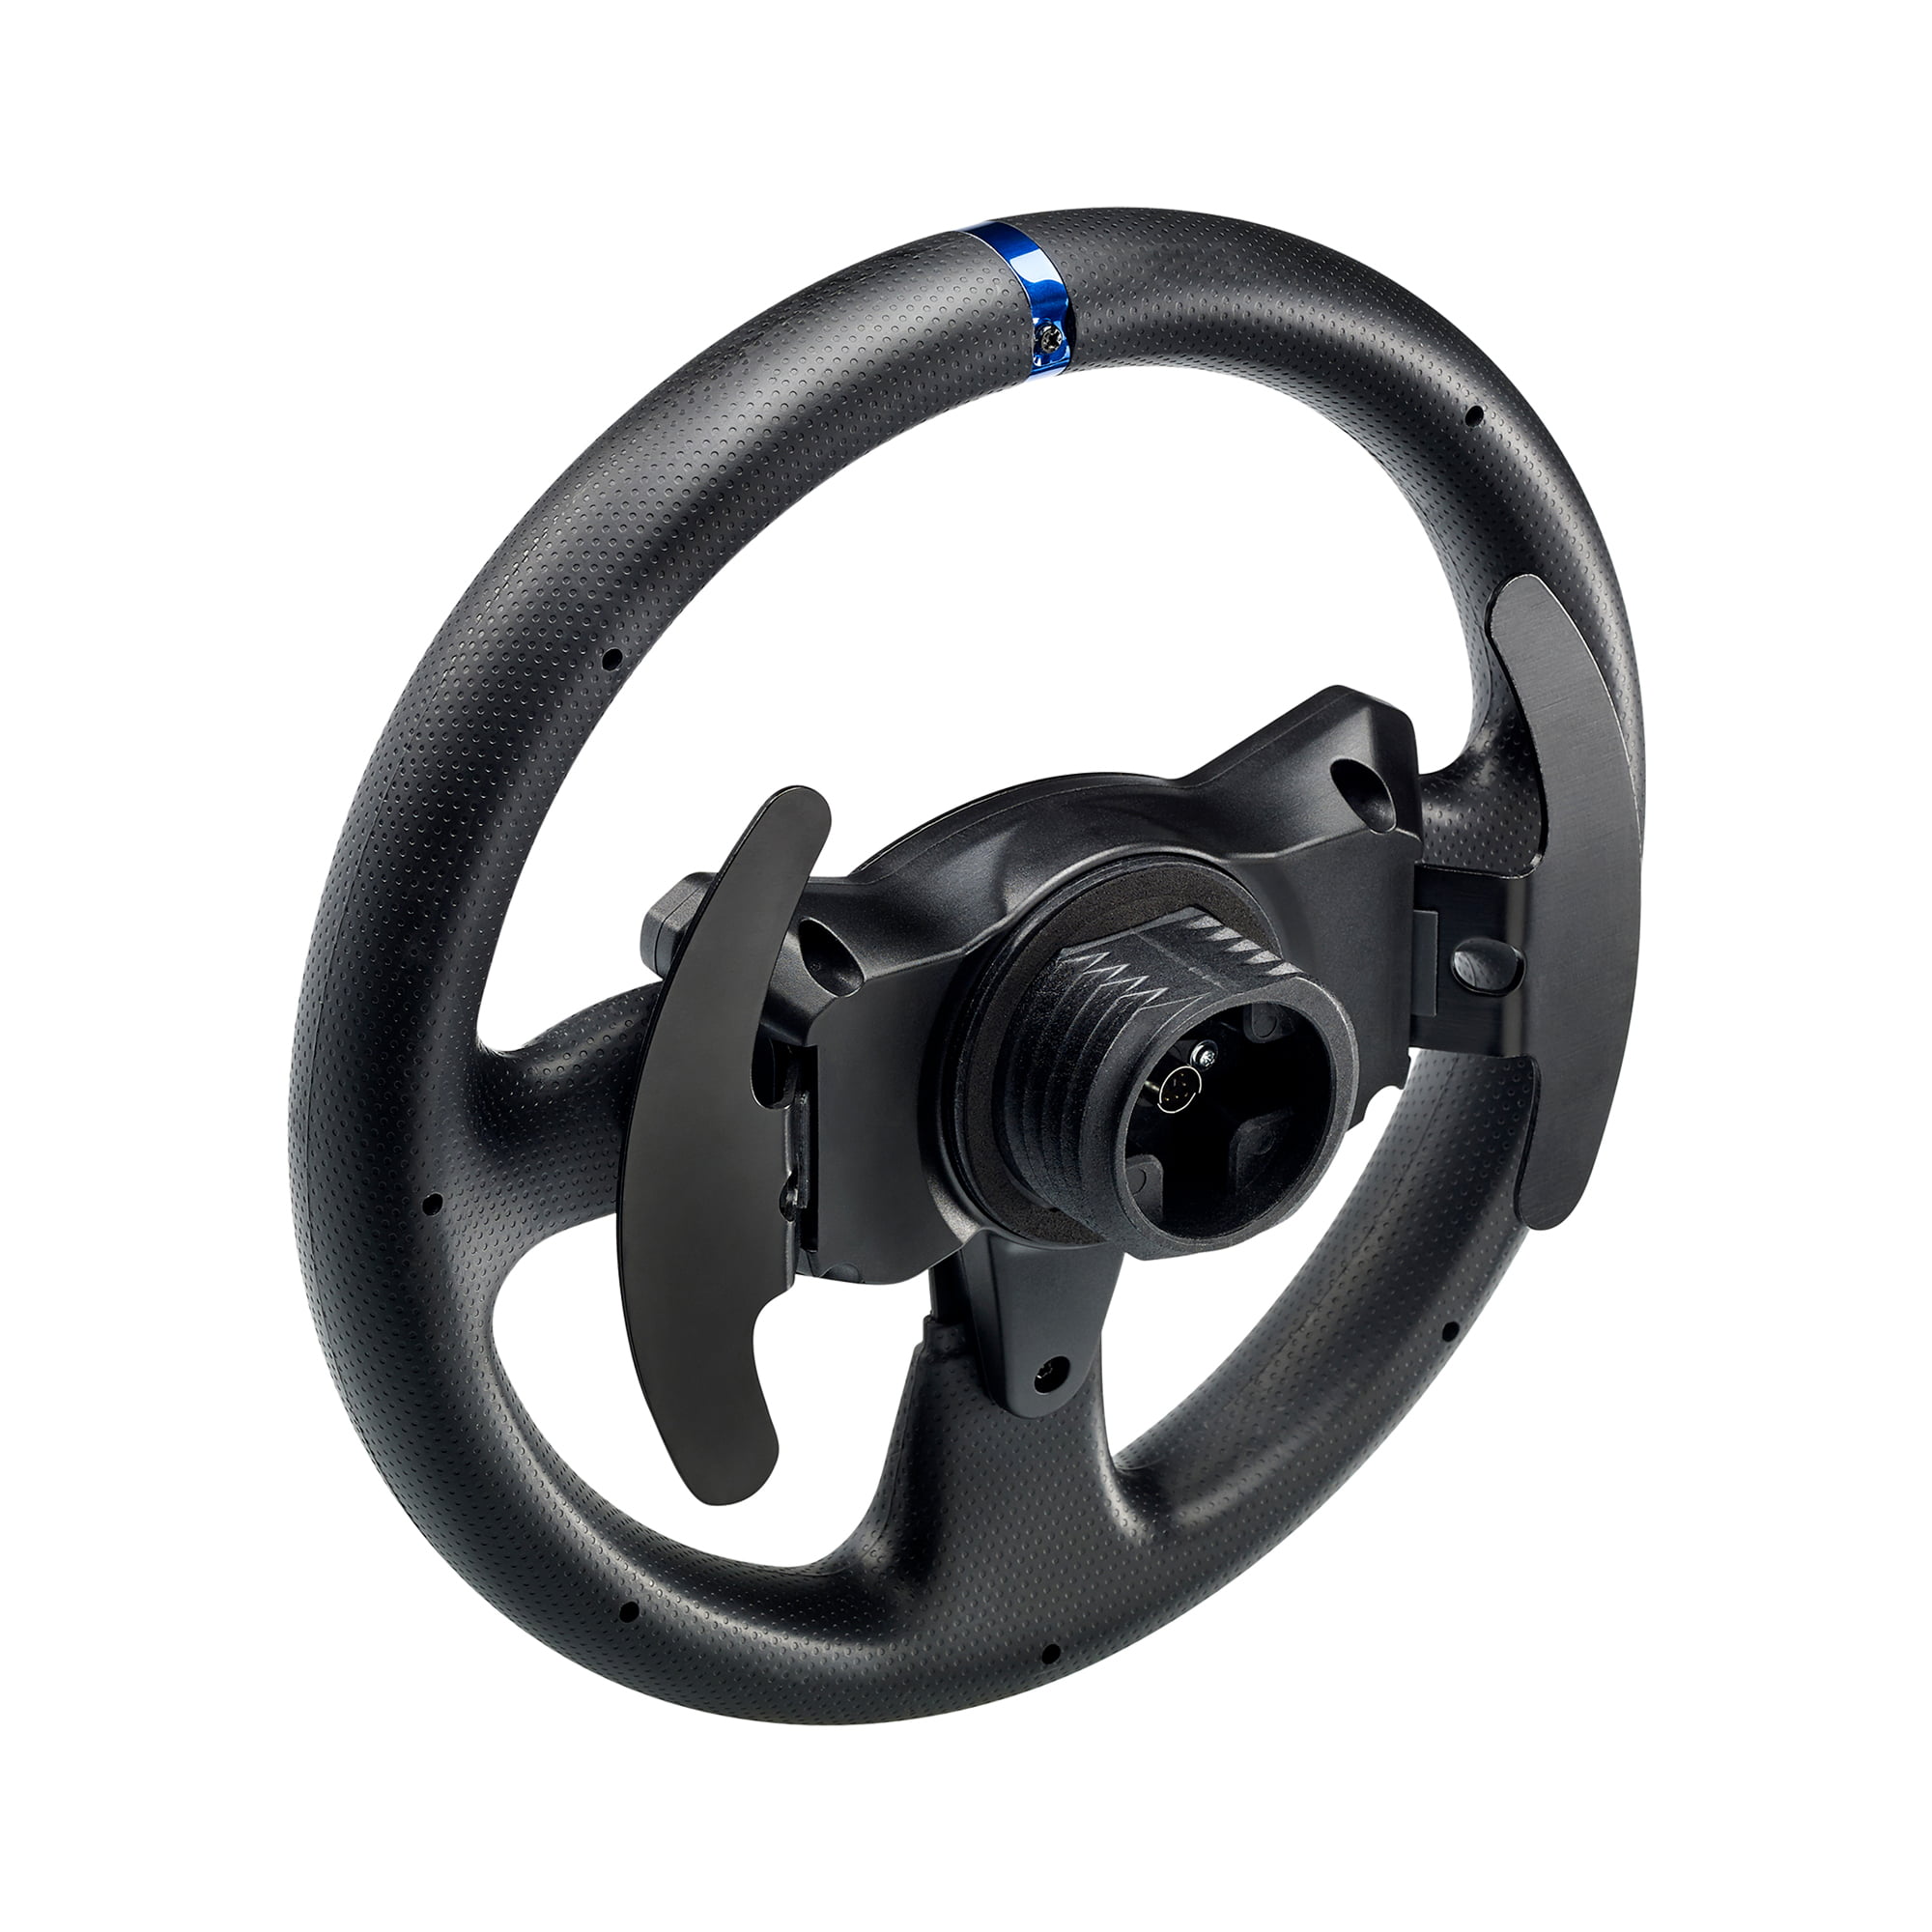 Thrustmaster T300RS Racing Wheel & Pedals w/ Paddle Shifters, PS3 